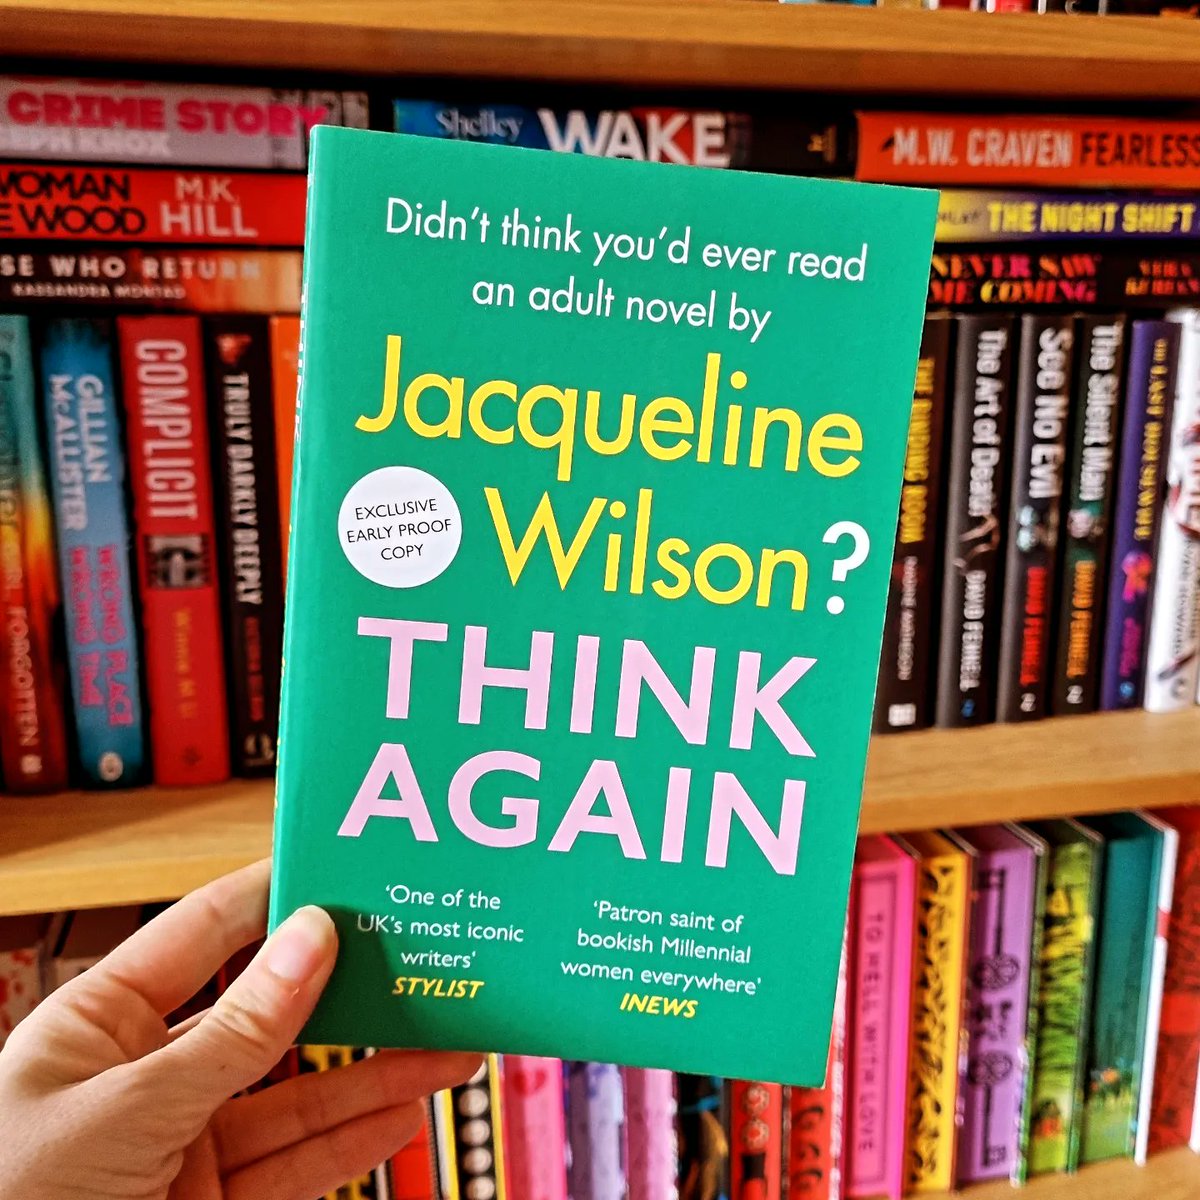 Not to be dramatic, but this is the book I've been waiting for my whole life. 🙌 The first adult novel by Jaqueline Wilson and it's a sequel to the Girls In Love series, the dream!! Thank you so much, @PenguinHuddleUK!